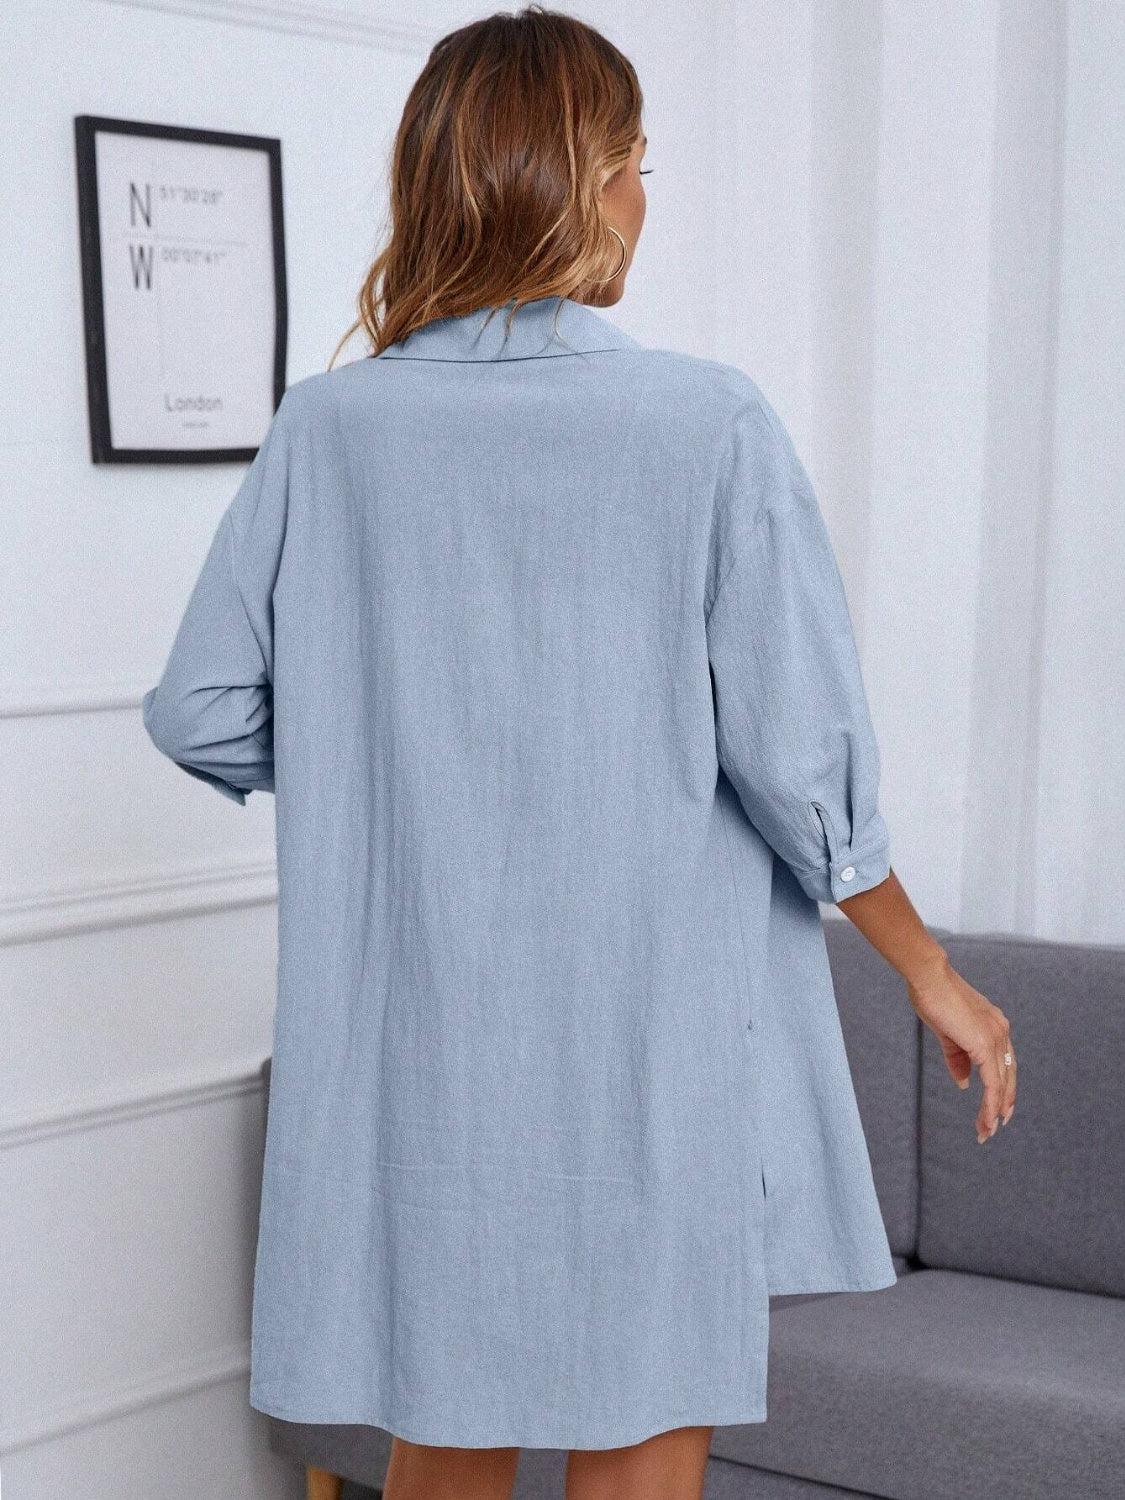 a woman standing in front of a couch wearing a blue shirt dress